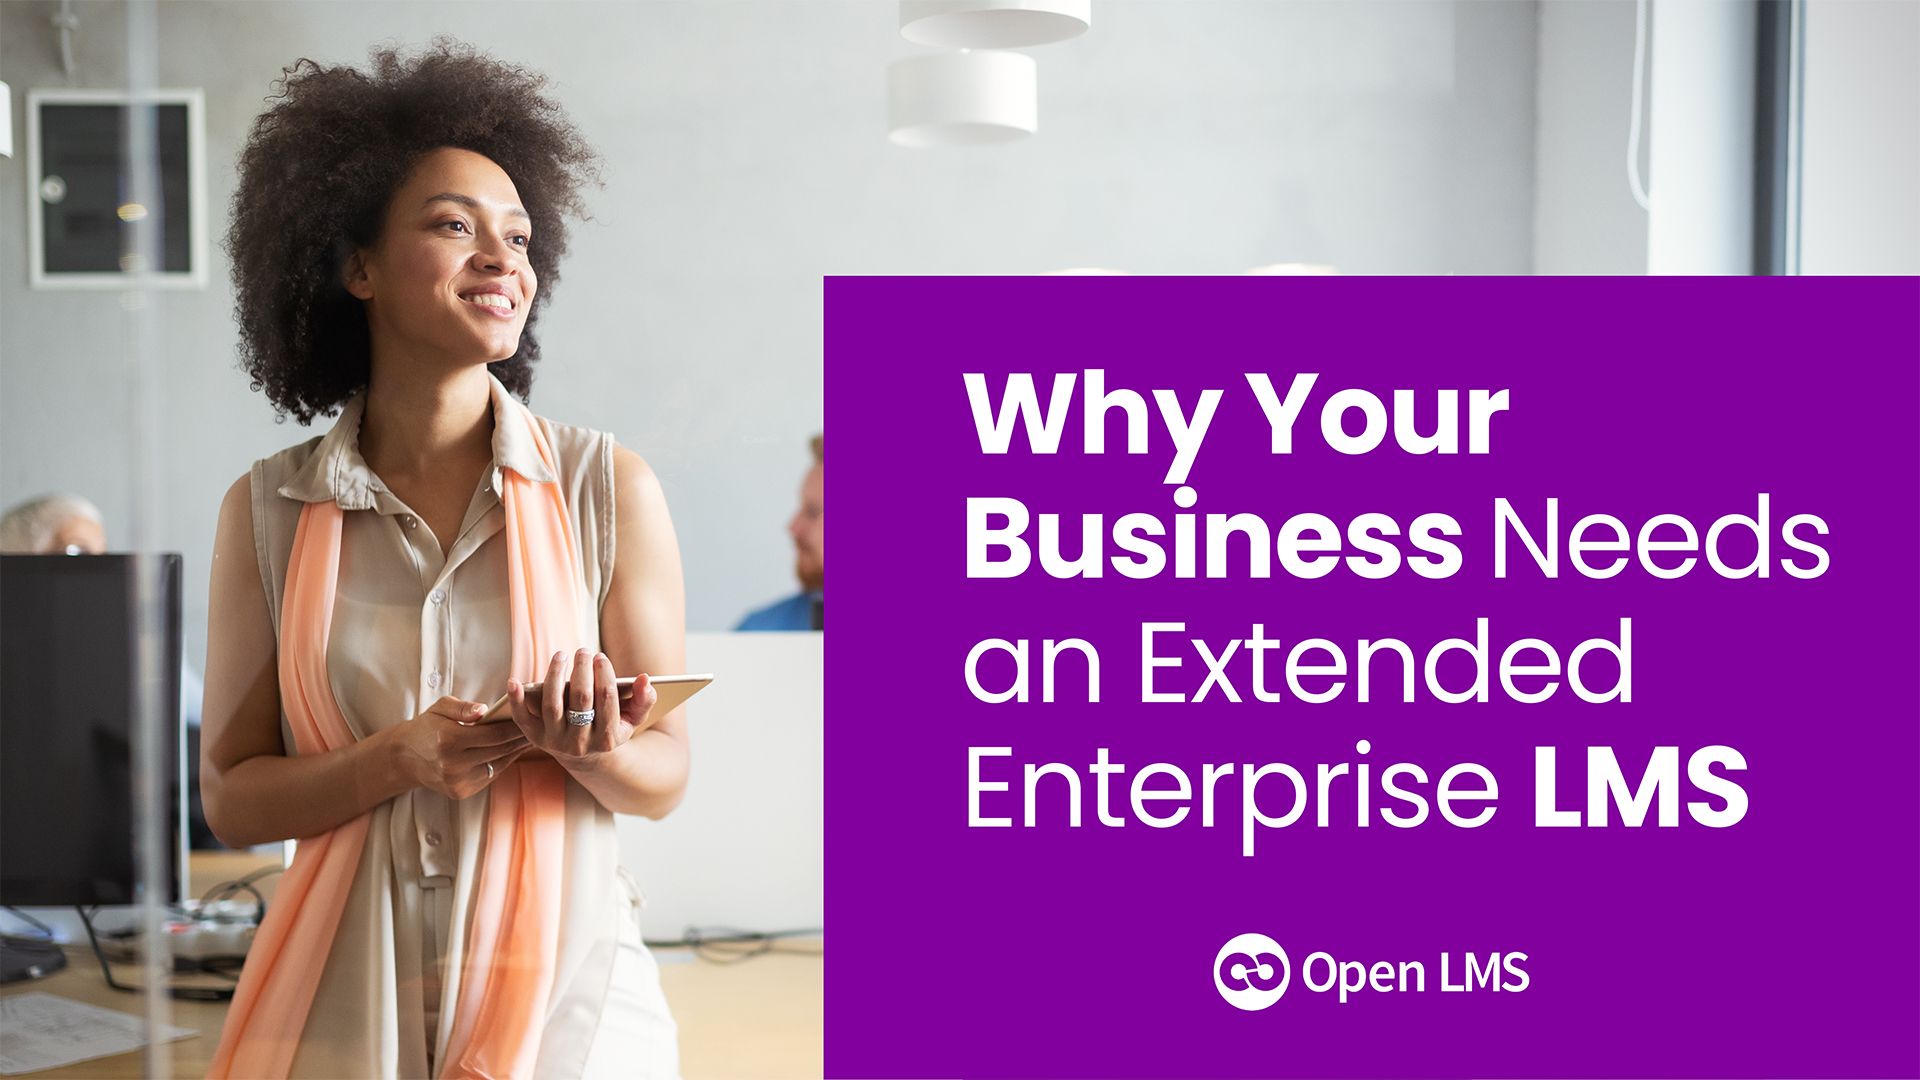 Why Your Business Needs an Extended Enterprise LMS